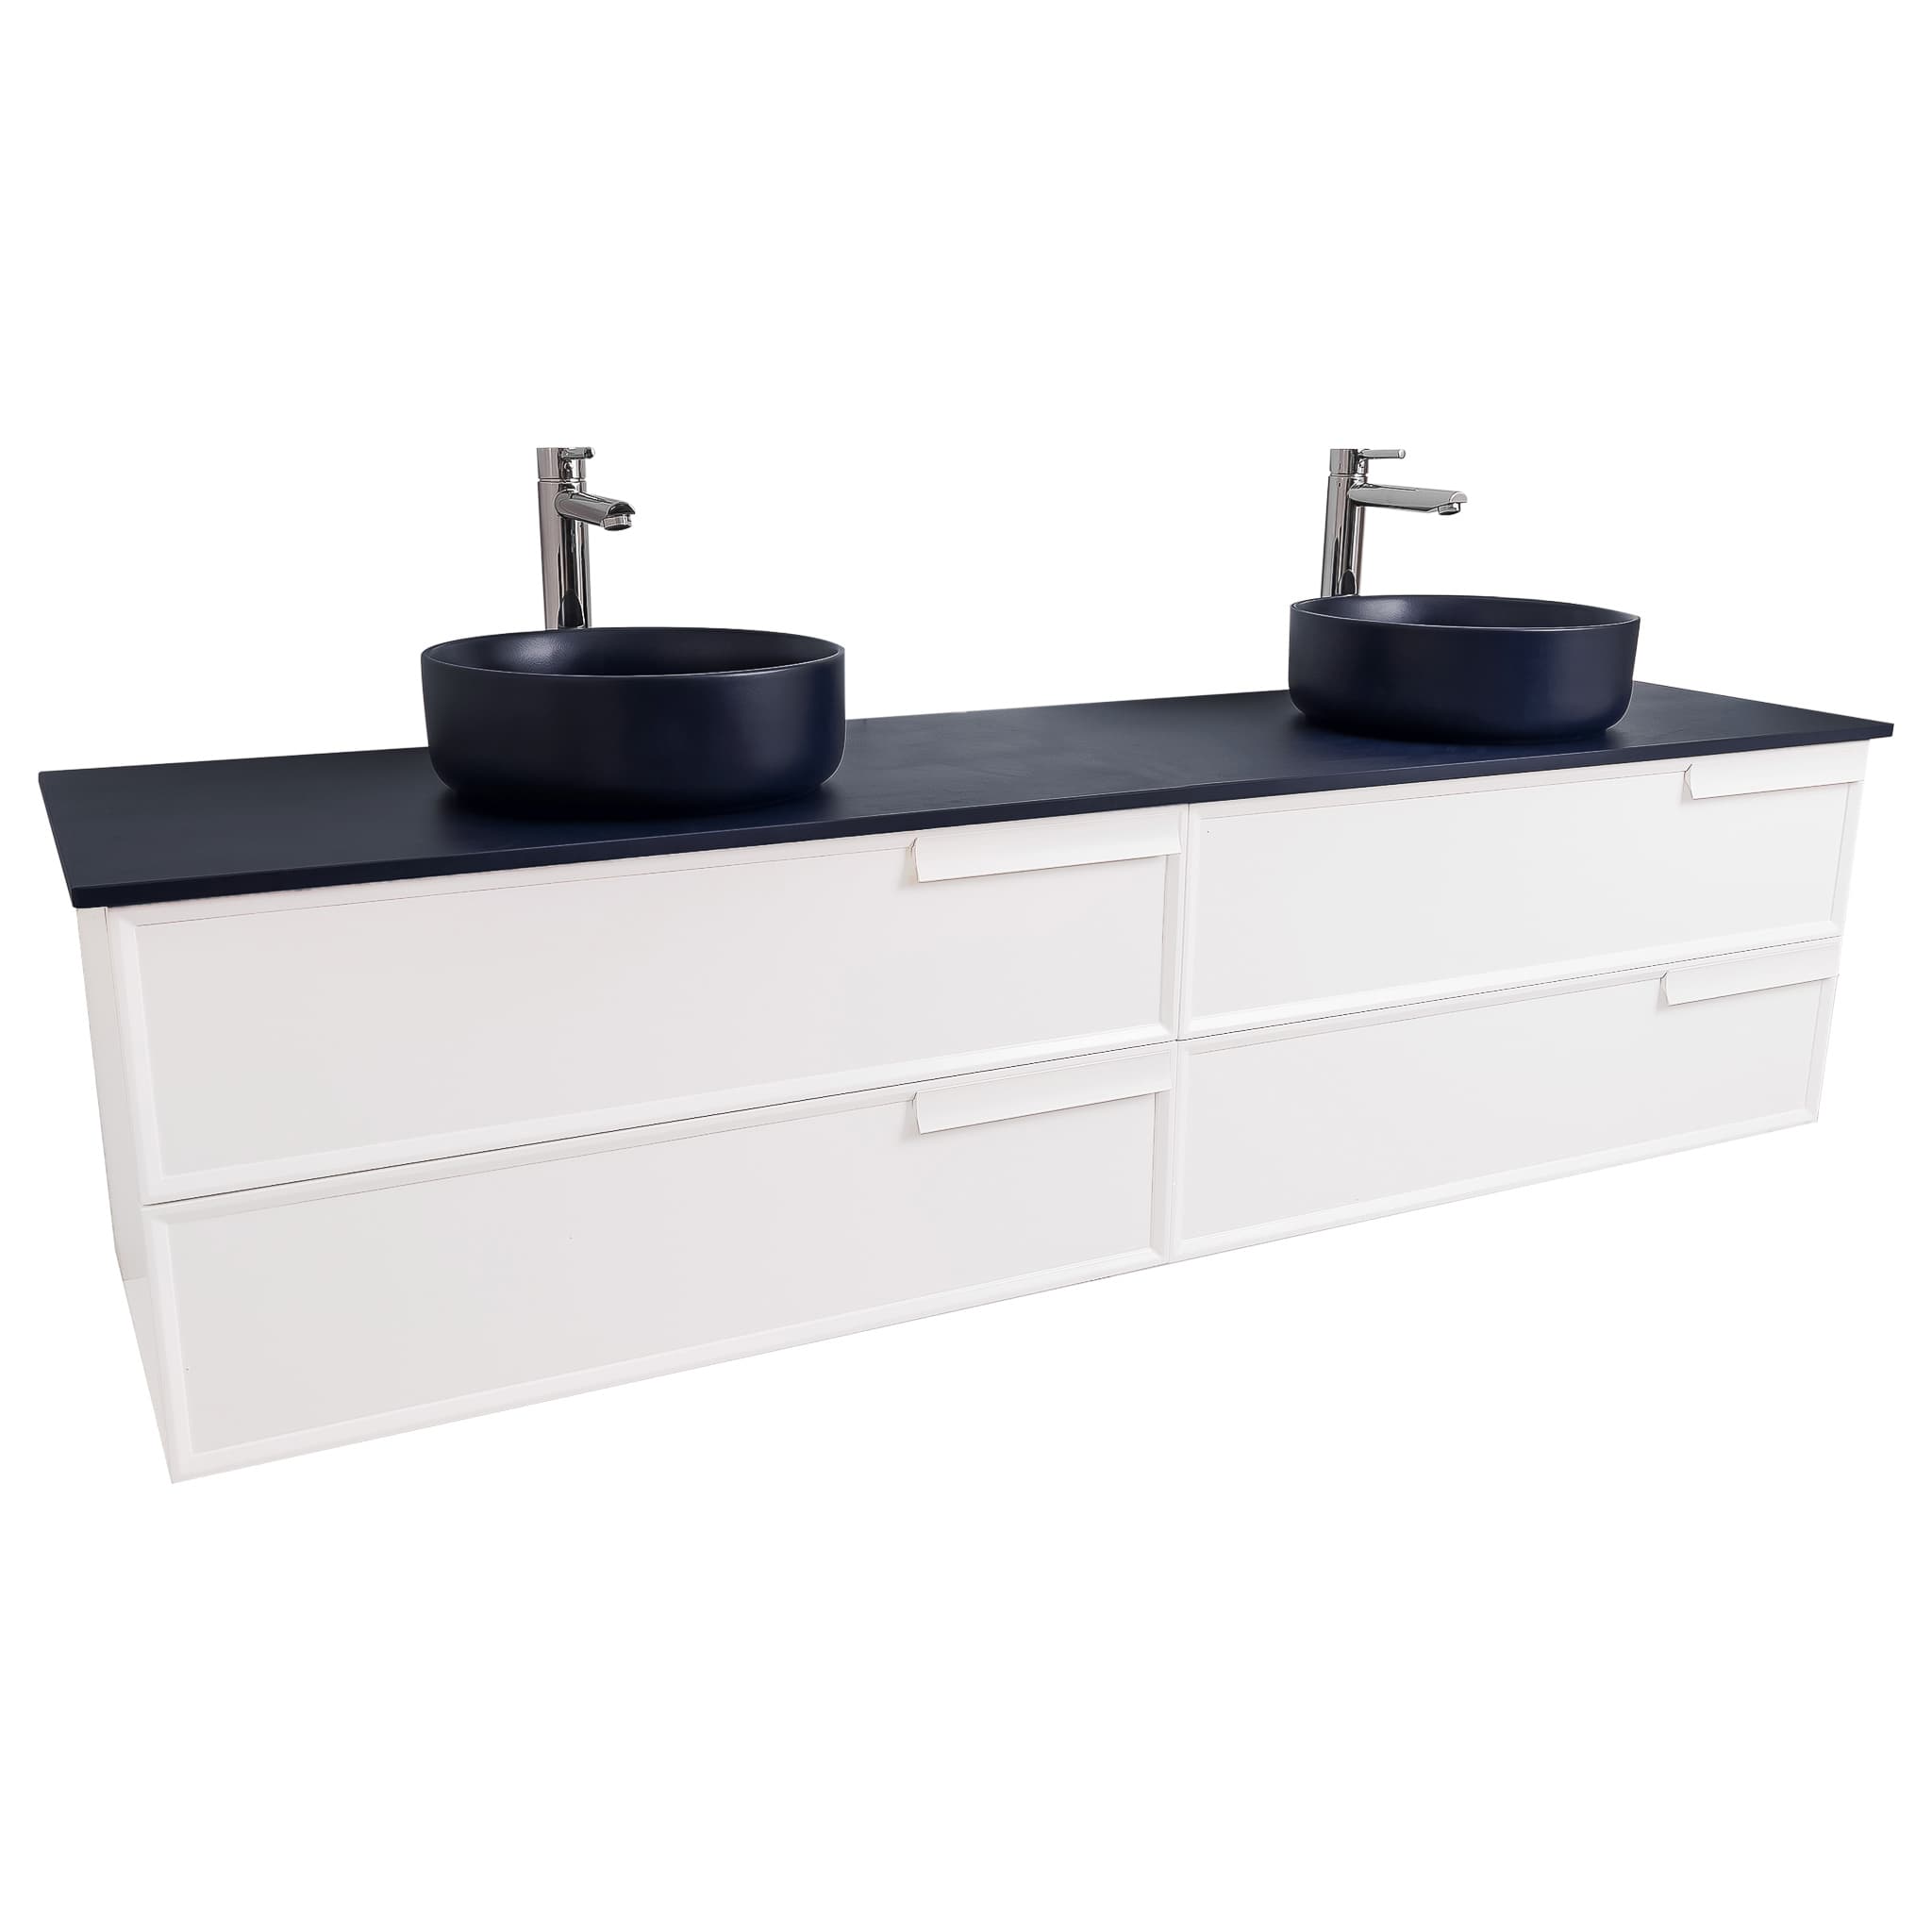 Garda 63 Matte White Cabinet, Ares Navy Blue Top and Two Ares Navy Blue Ceramic Basin, Wall Mounted Modern Vanity Set